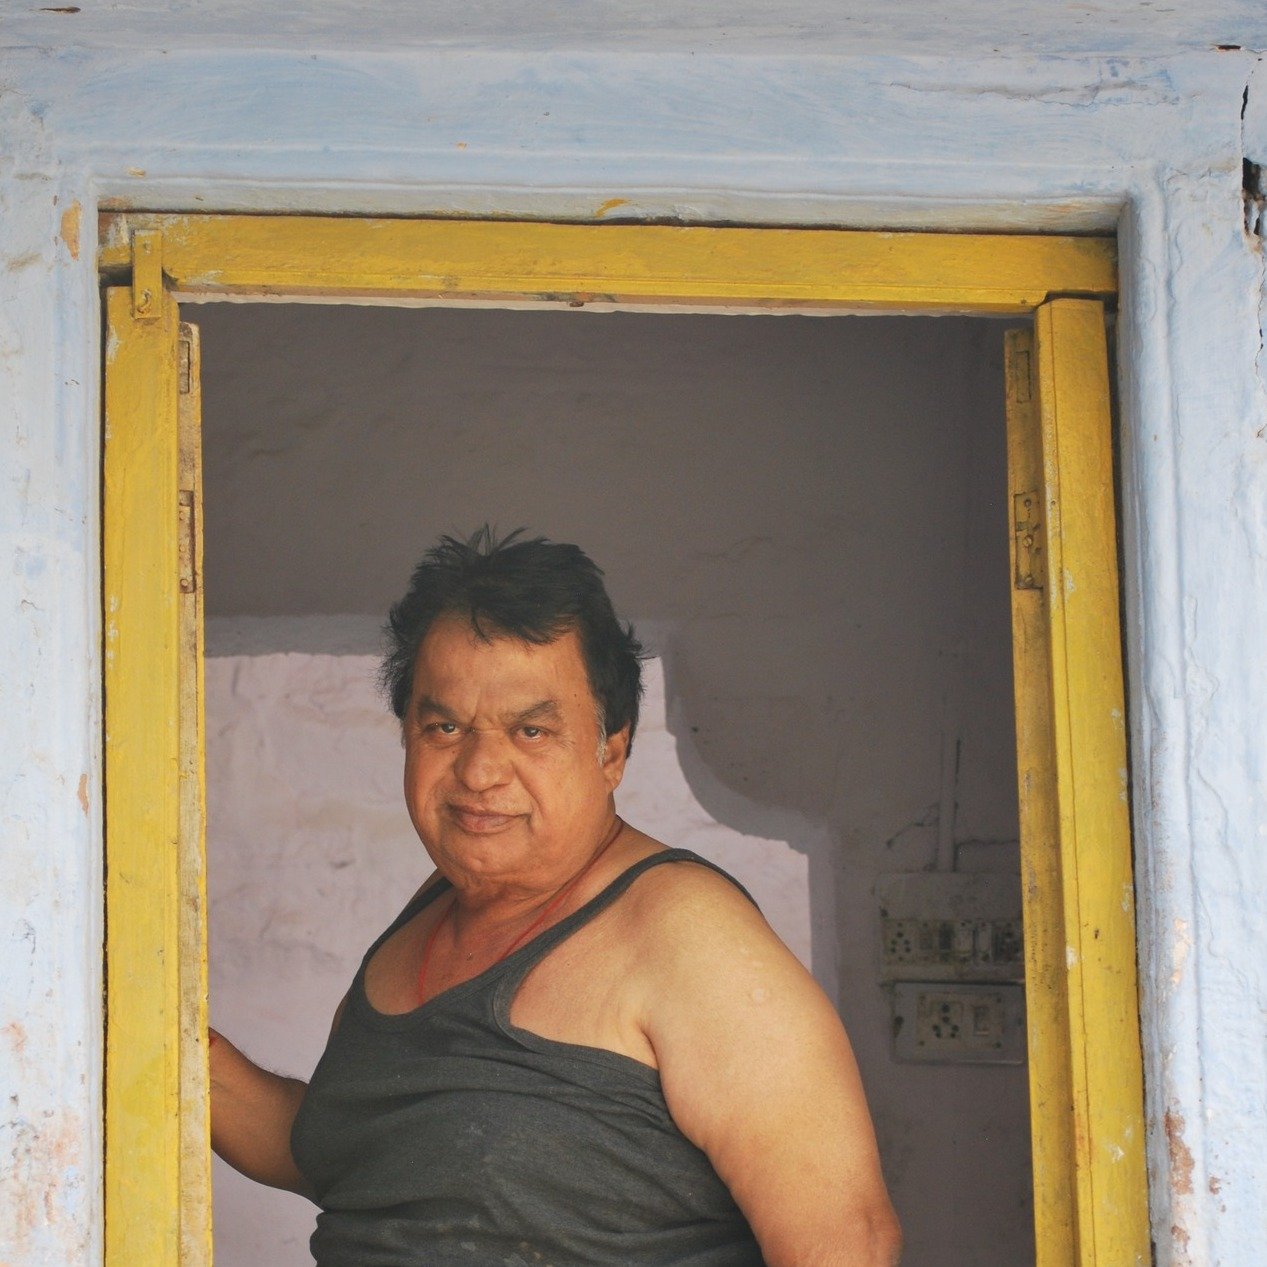 We met so many interesting characters on our recent trip - loved this guy people watching from his fantastic yellow window.